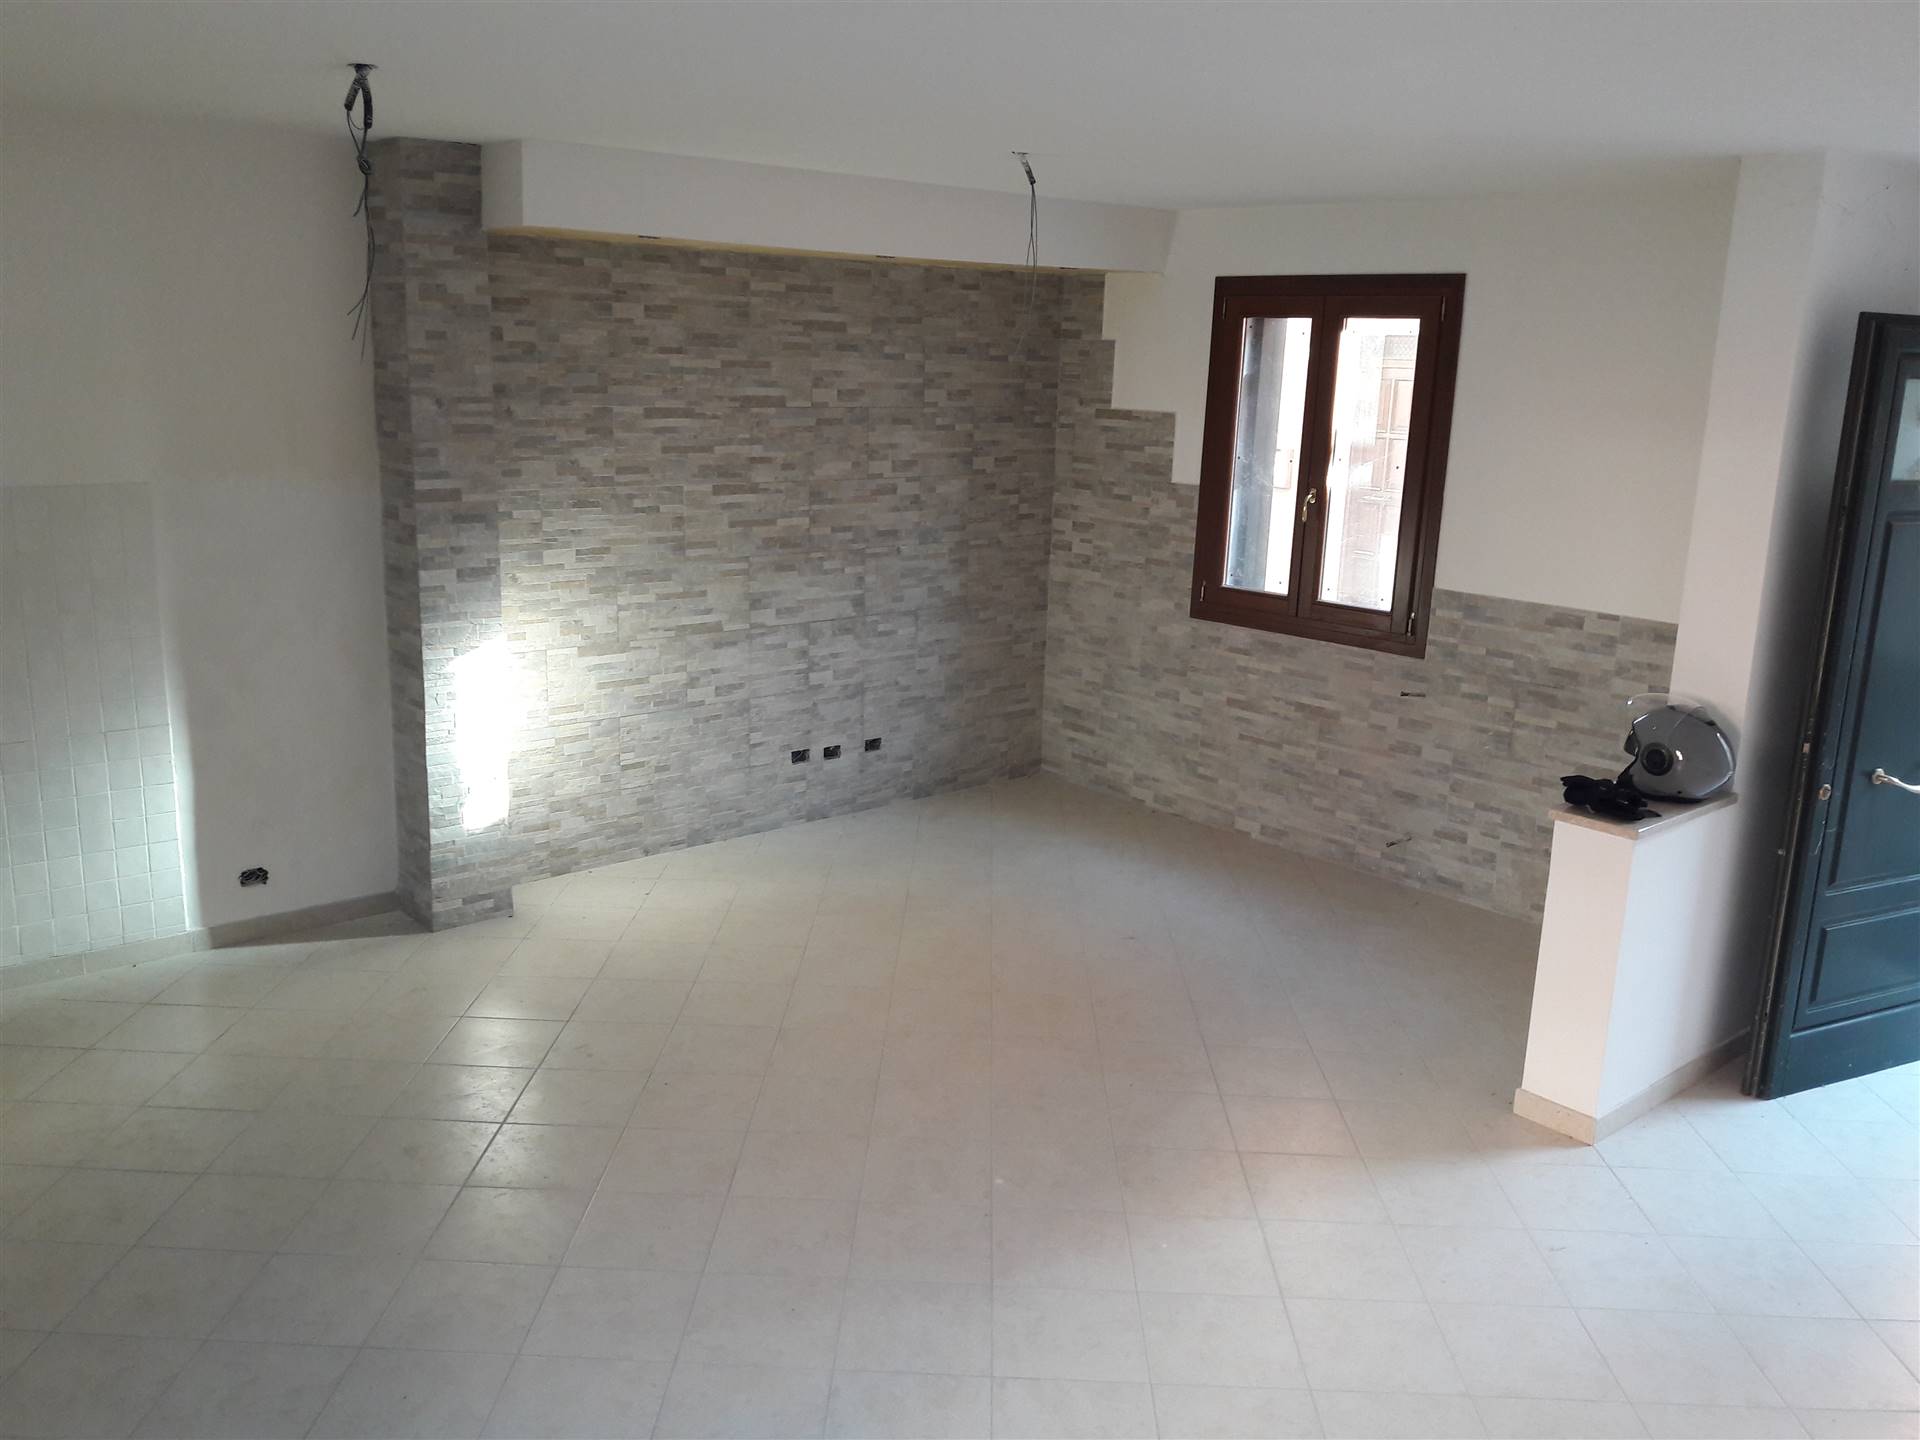 LOREO, Single house for sale of 110 Sq. mt., Restored, Heating Individual heating system, Energetic class: G, composed by: 4 Rooms, Separate kitchen, 